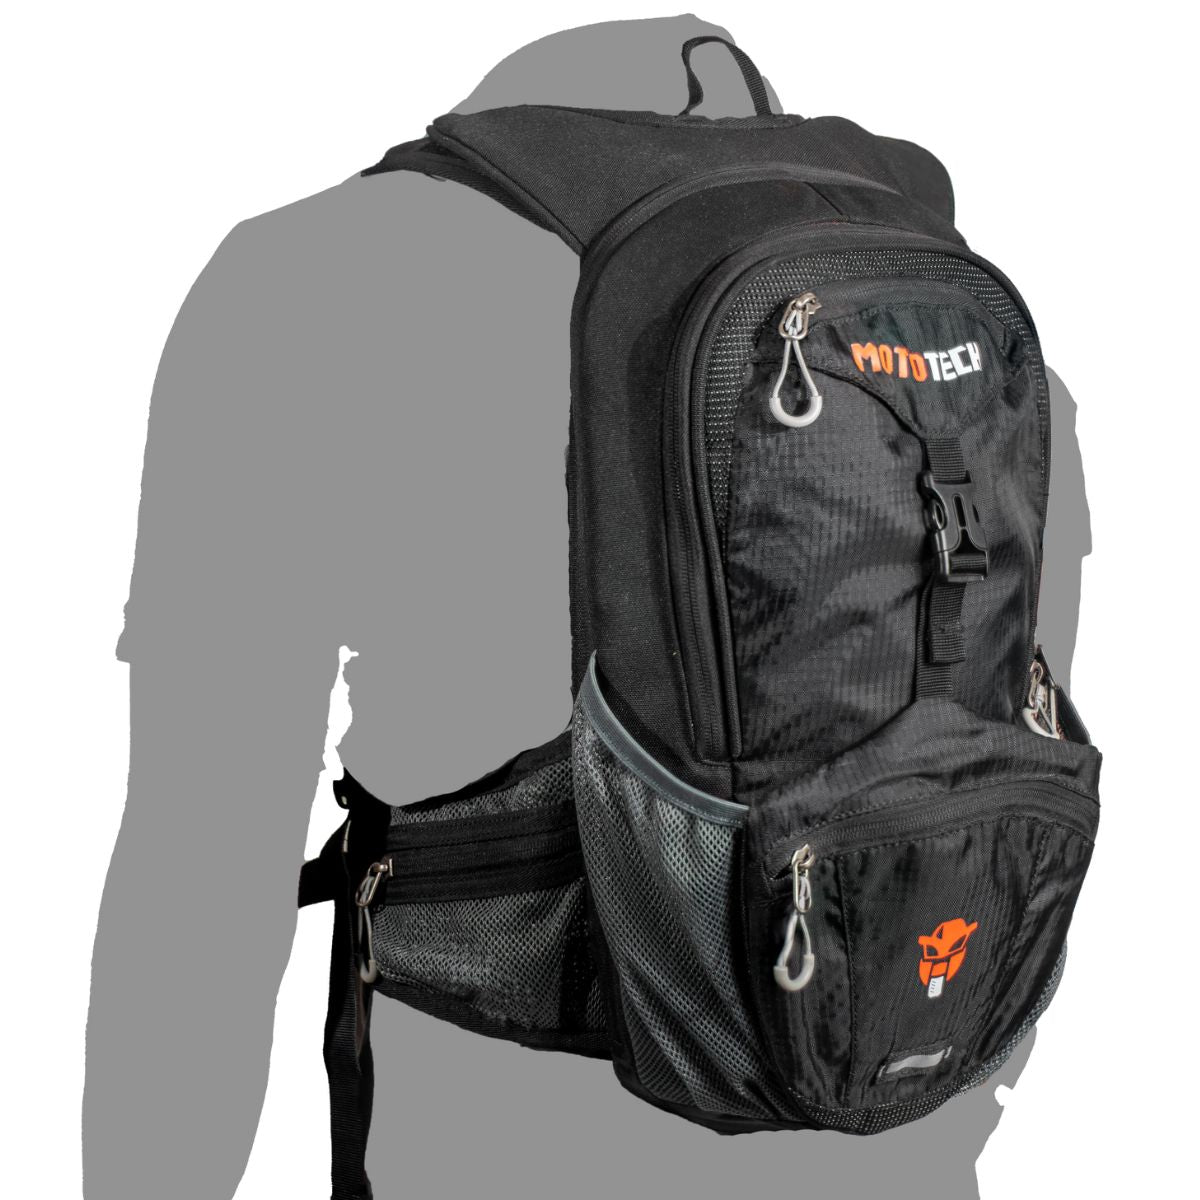 Hydration Reservoir - 2L + Stealth Hydration Backpack - 8L 4